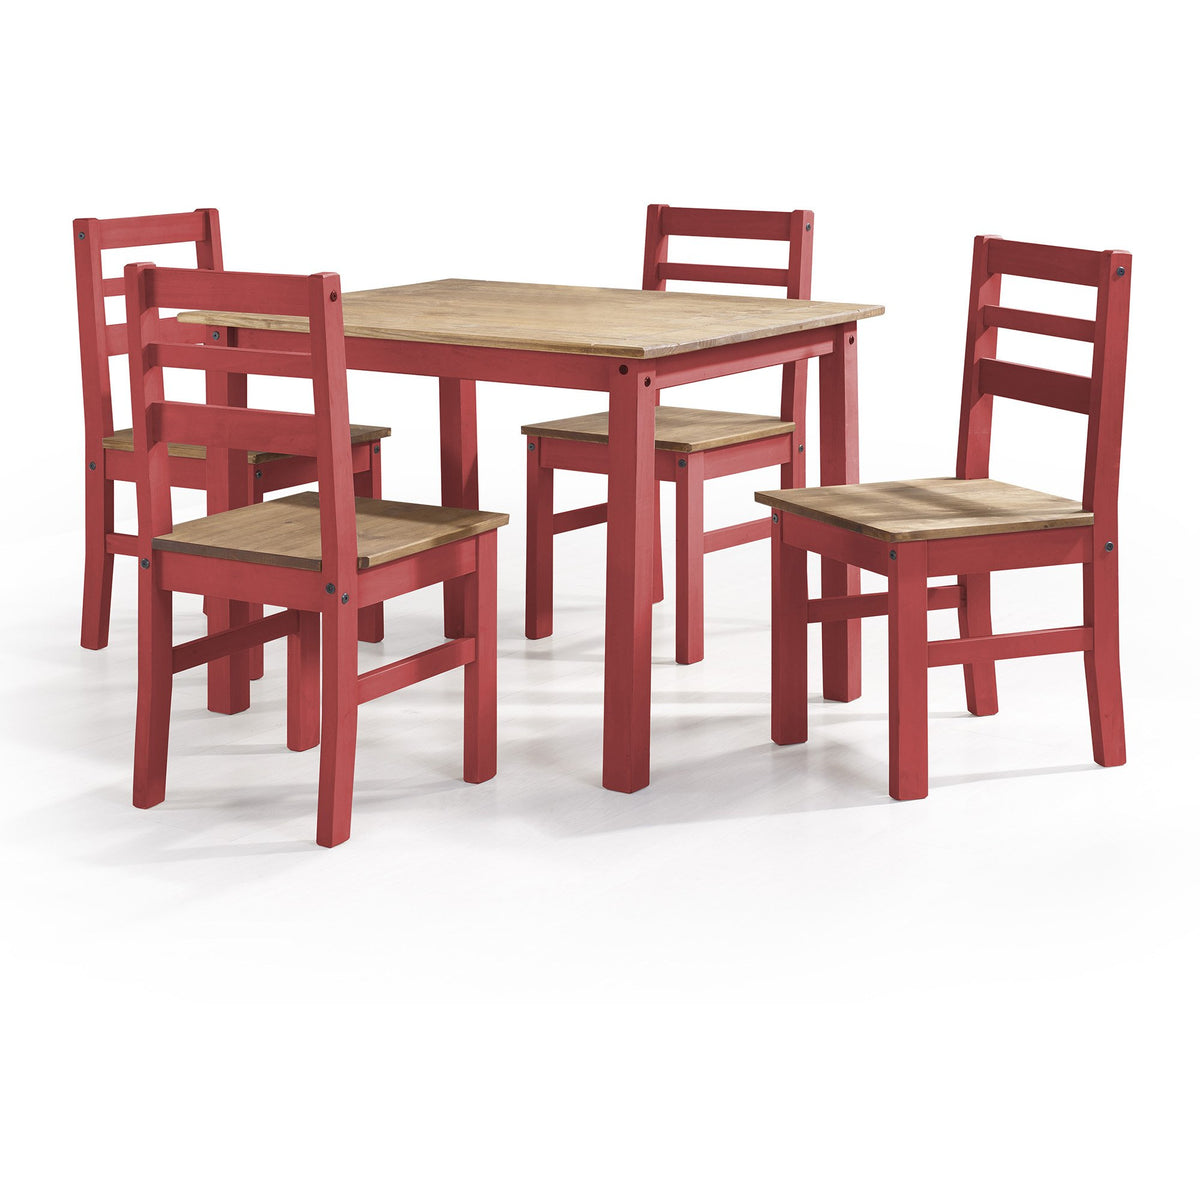 Manhattan Comfort Maiden 5-Piece Solid Wood Dining Set with 1 Table and 4 Chairs in Red Wash-Minimal & Modern